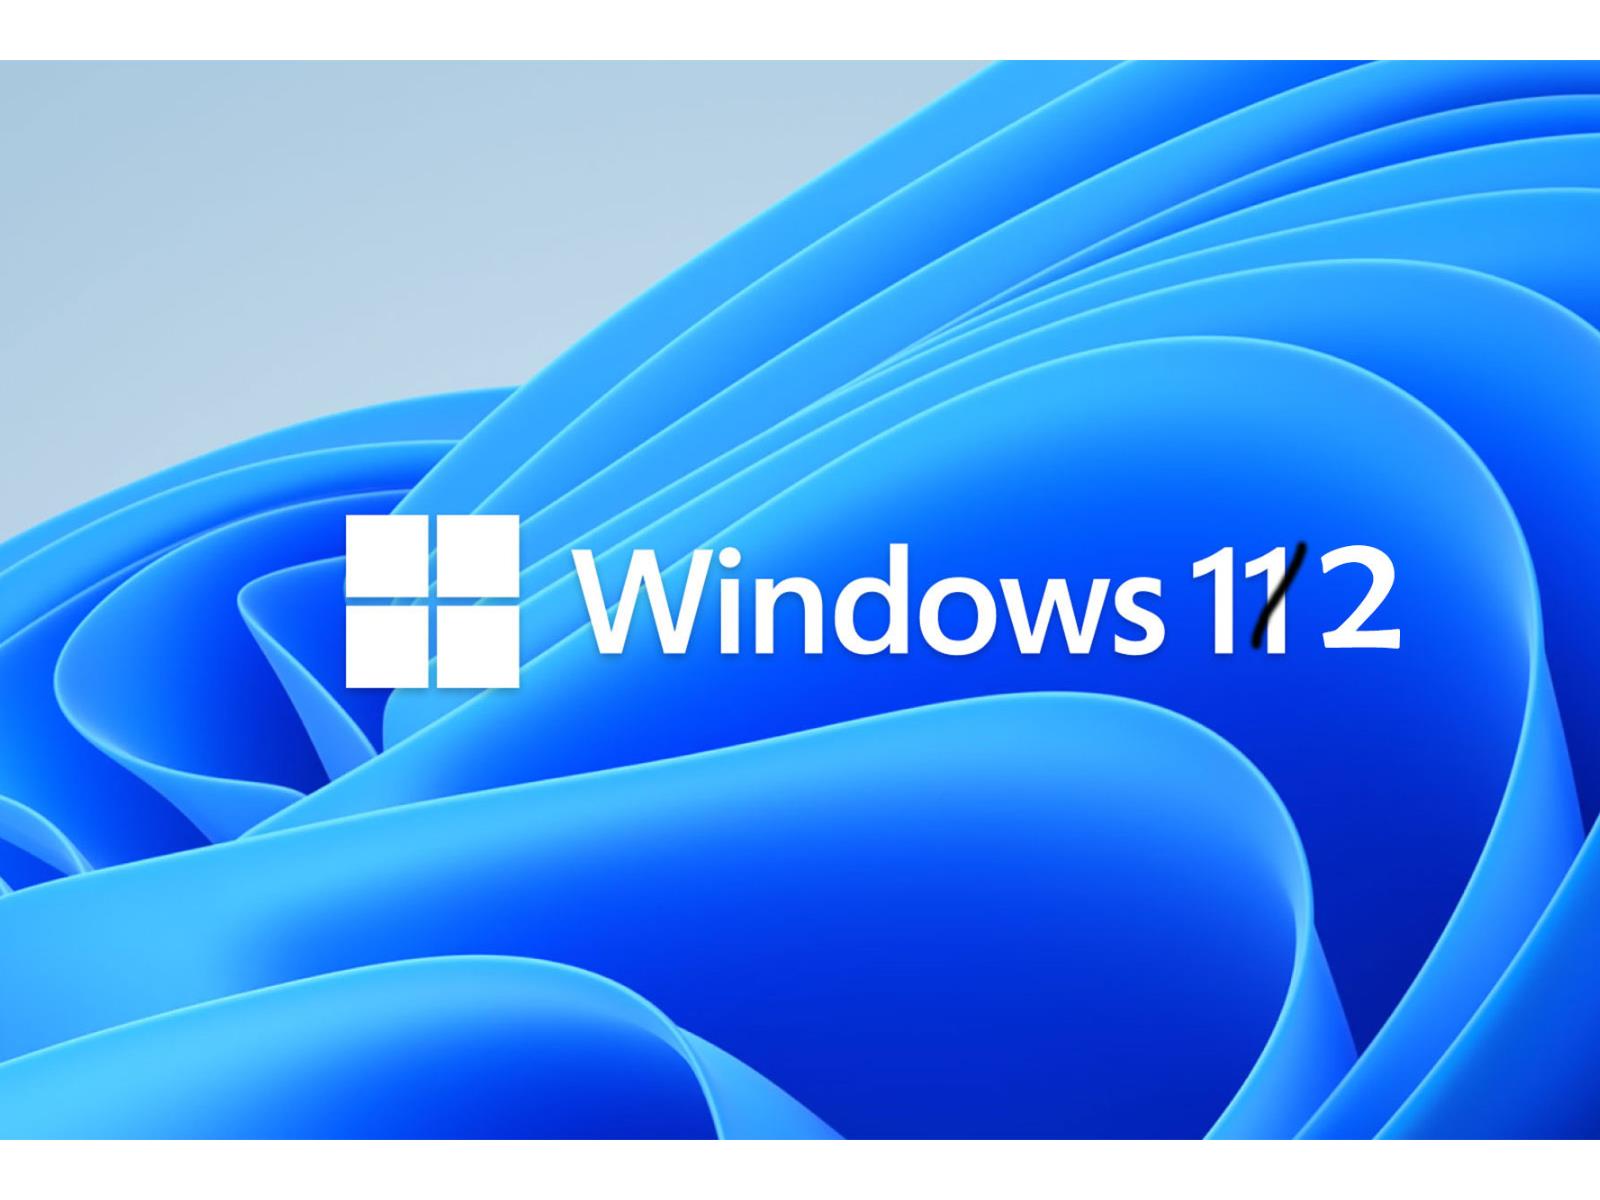 Windows 12 Likely To Launch In 2024 Amid A Major Release Cadence Shakeup |  HotHardware